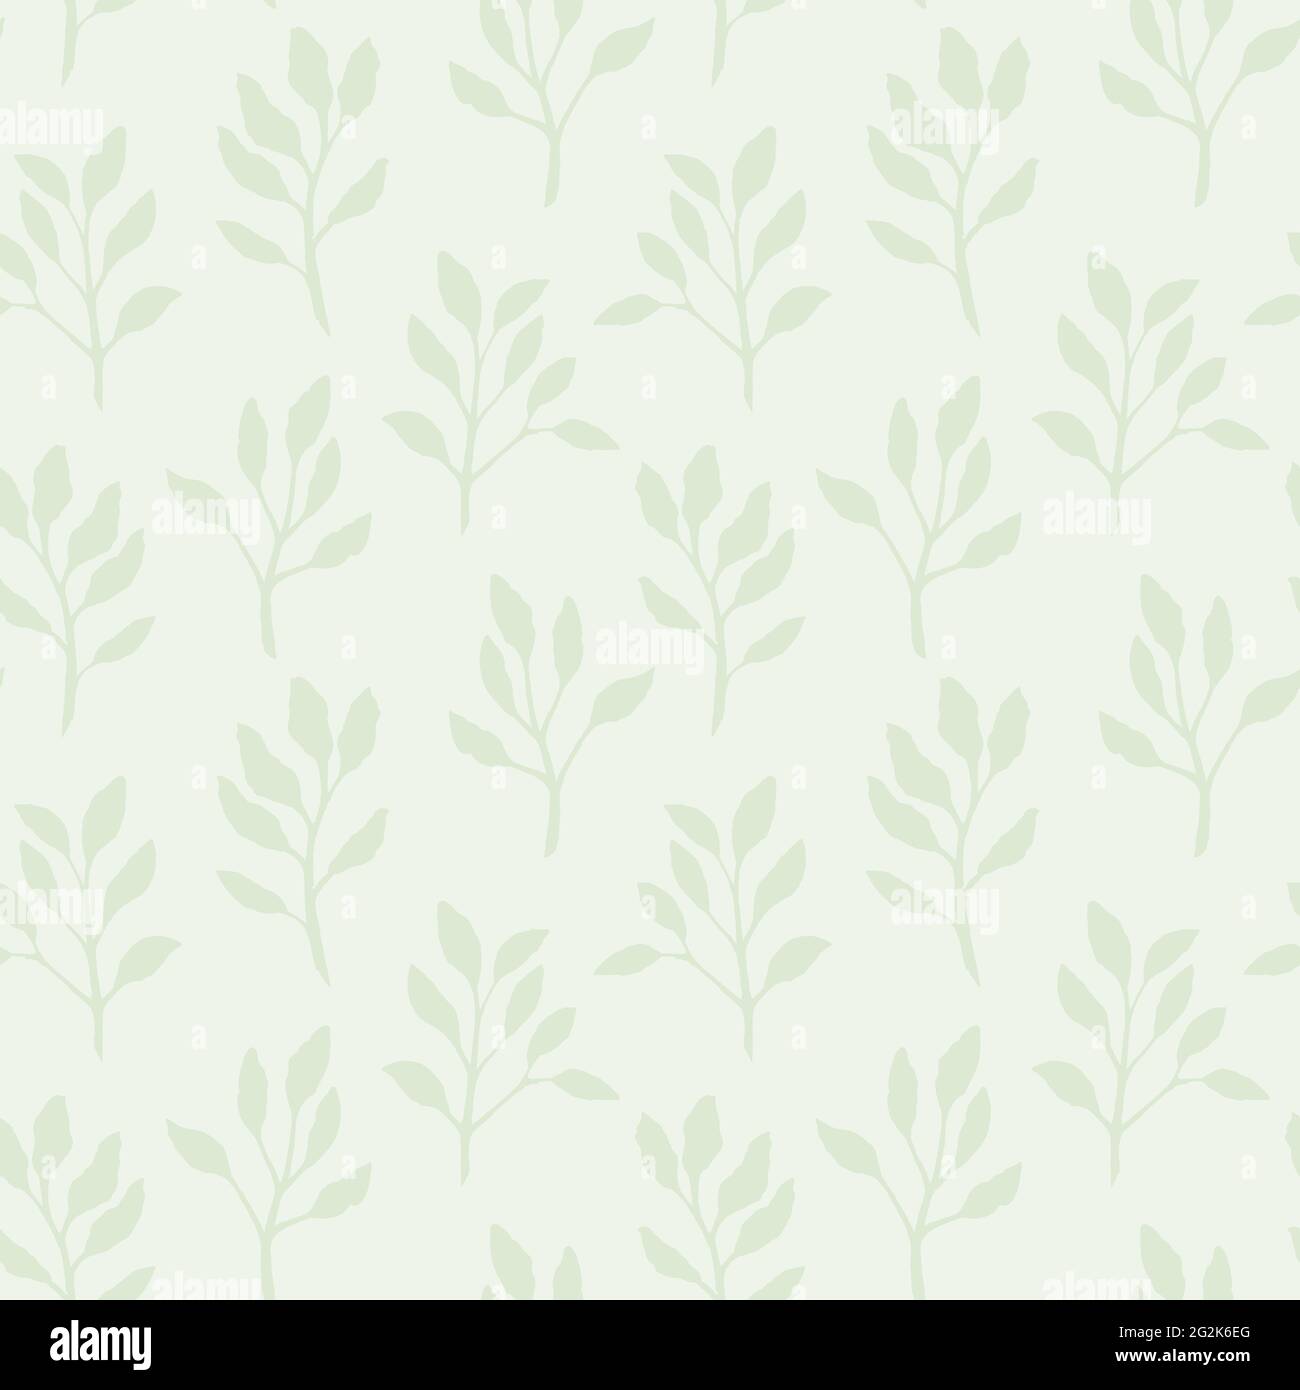 The square vector pastel green plant pattern textured seamless wallpaper background Stock Vector